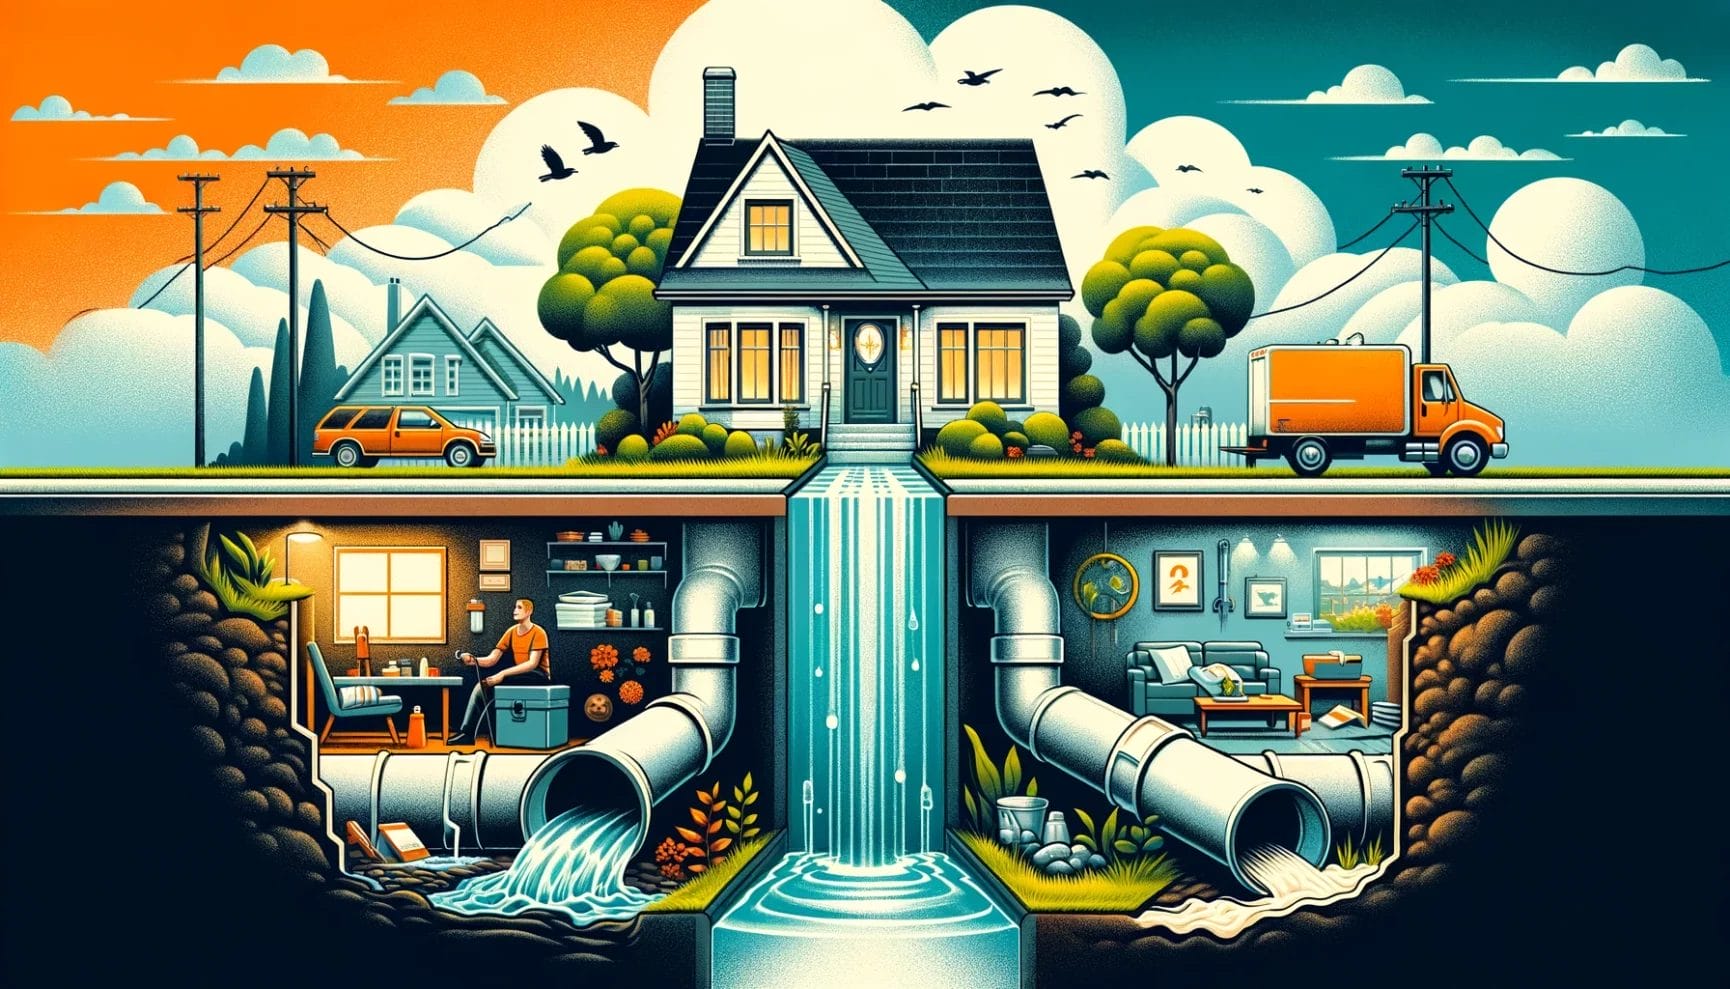 Cross-section illustration depicting suburban life above ground and the unseen infrastructure and personal activities below the surface.